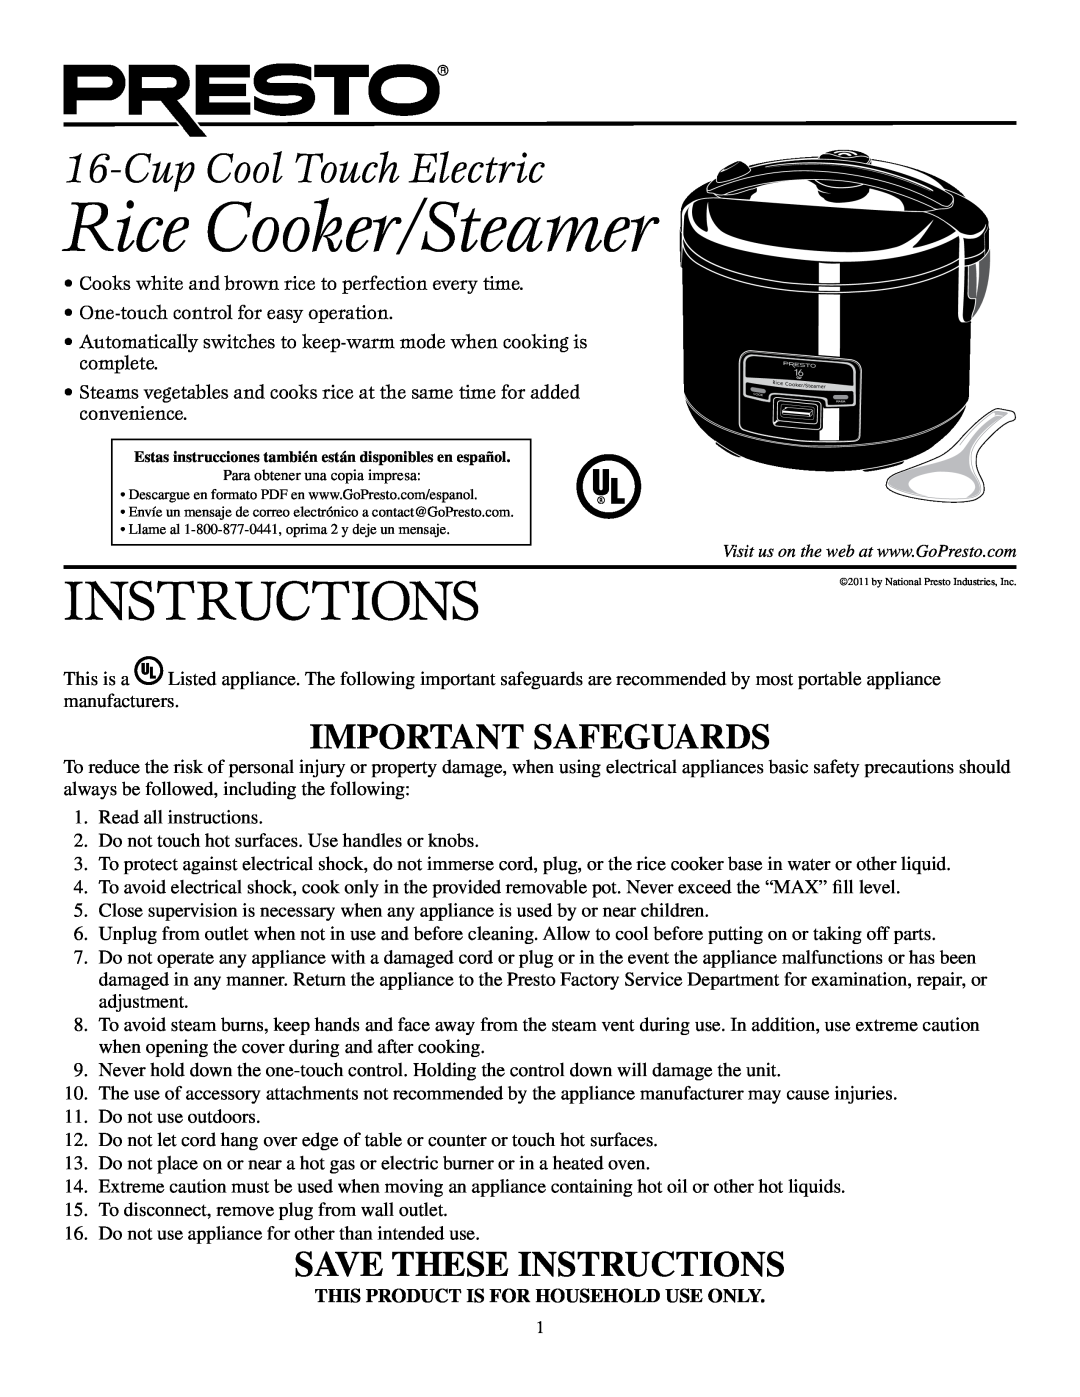 Presto manual Rice Cooker/Steamer, Cup Cool Touch Electric, Important Safeguards, Save These Instructions 